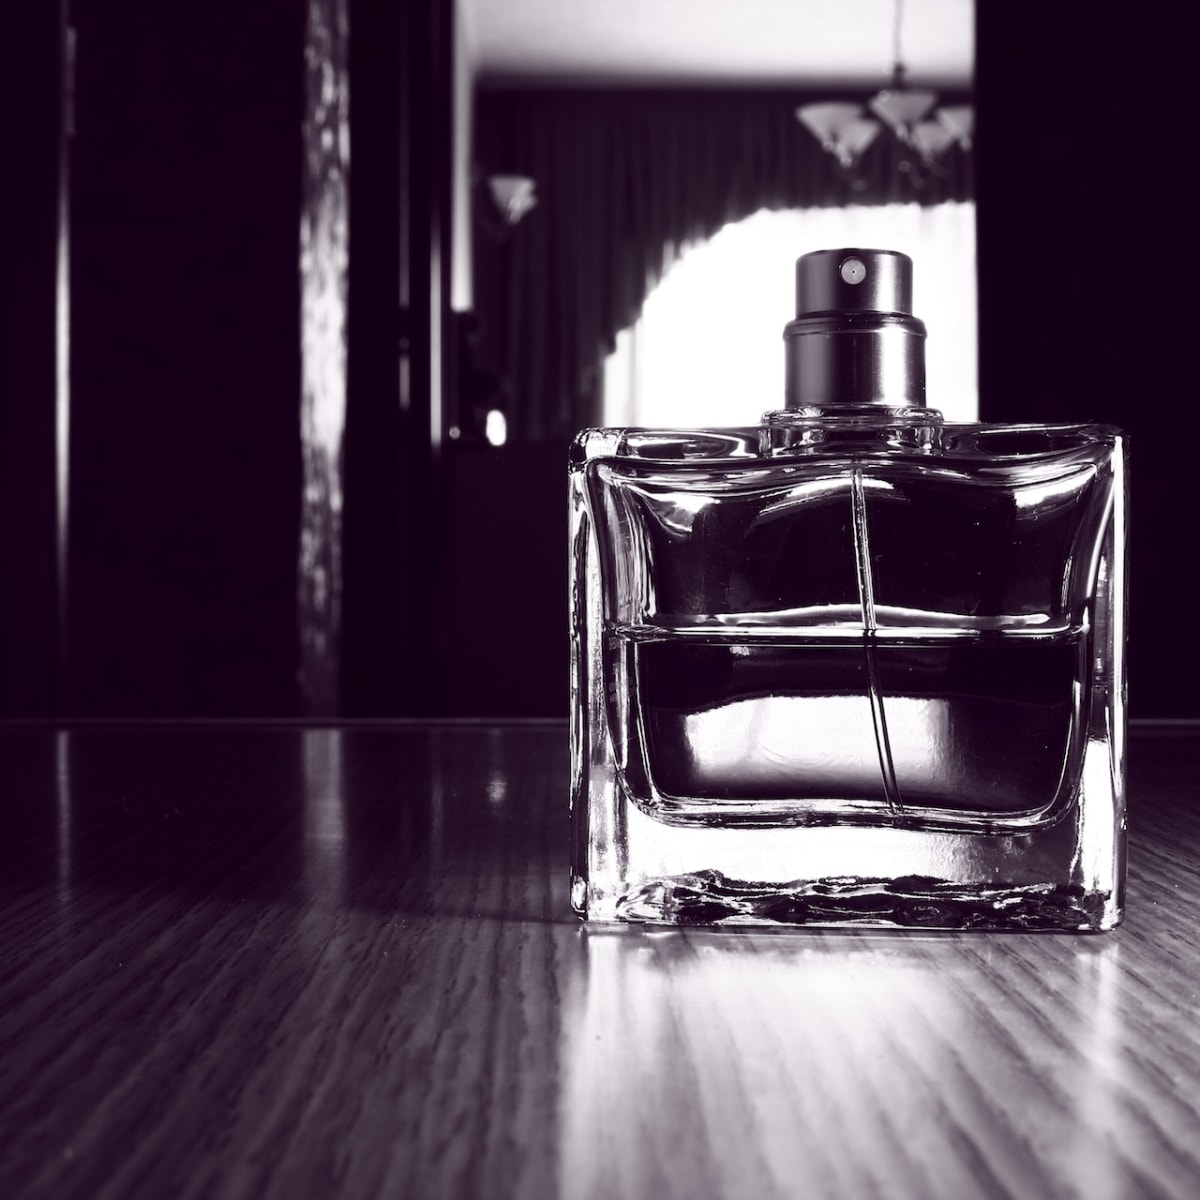 Perfume Testers Vs. Retail Boxed Fragrances: Which Should You Buy